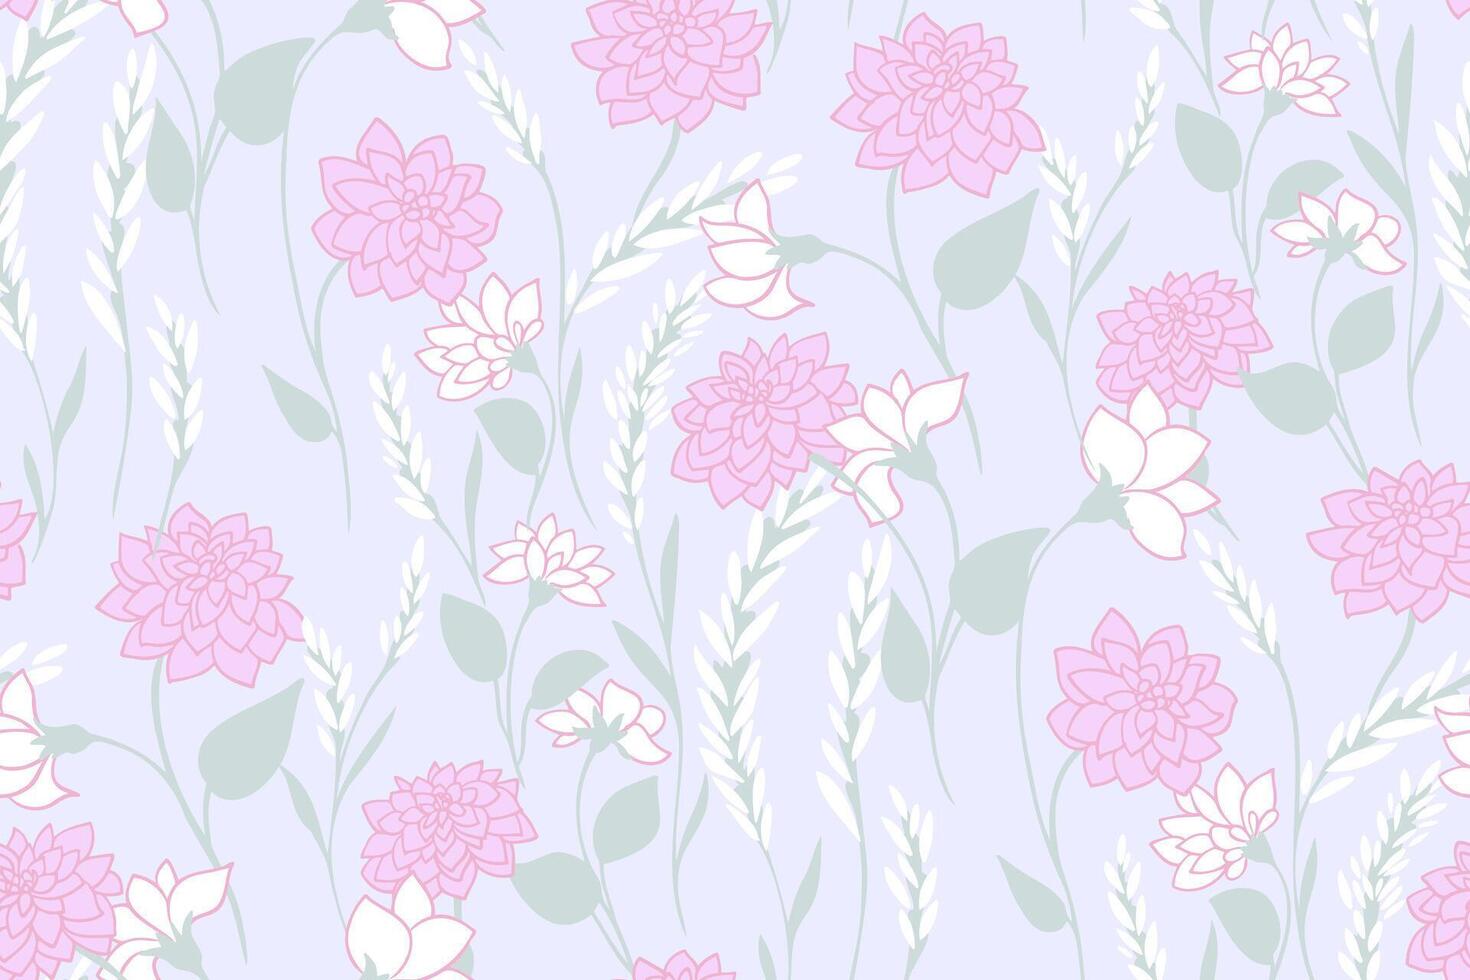 Pastel wild meadow intertwined in a seamless pattern on a light blue background. Abstract artistic branches with ditsy flowers, leave, buds printing.  Vector hand drawn. Template for designs, fabric